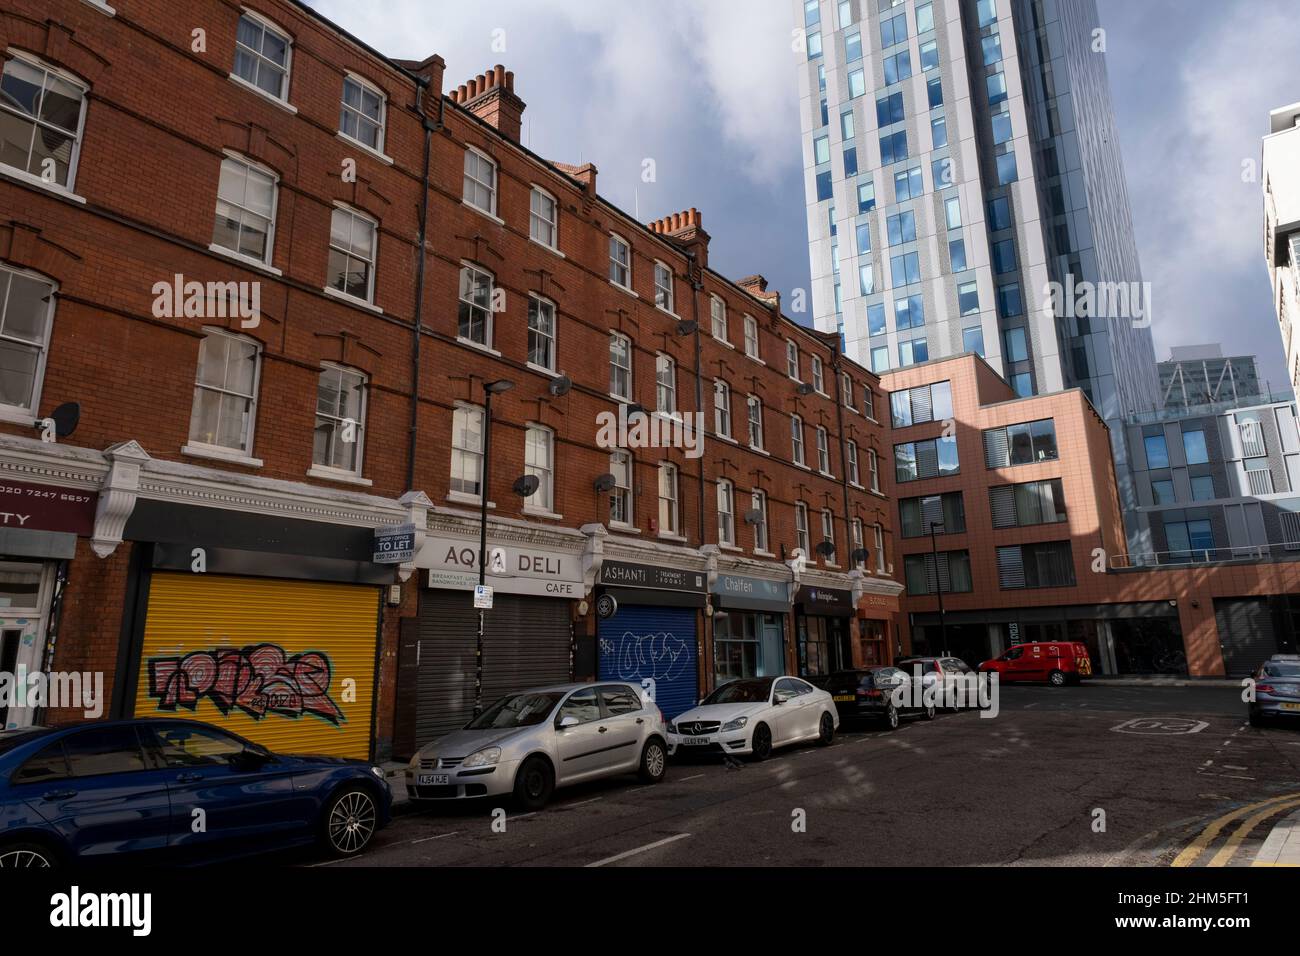 Old red brick buildings on Leyden Street are loomed over by one of the numerous towers in the City of London on 4th February 2022 in London, United Kingdom. The City of London is a city, ceremonial county and local government district that contains the primary central business district CBD of London. The City of London is widely referred to simply as the City is also colloquially known as the Square Mile. Over the last decade or so the architecture of the City has grown upwards with skyscrapers filling the now cluttered skyline, and increasing it’s scale upwards with glass towers, some of whic Stock Photo